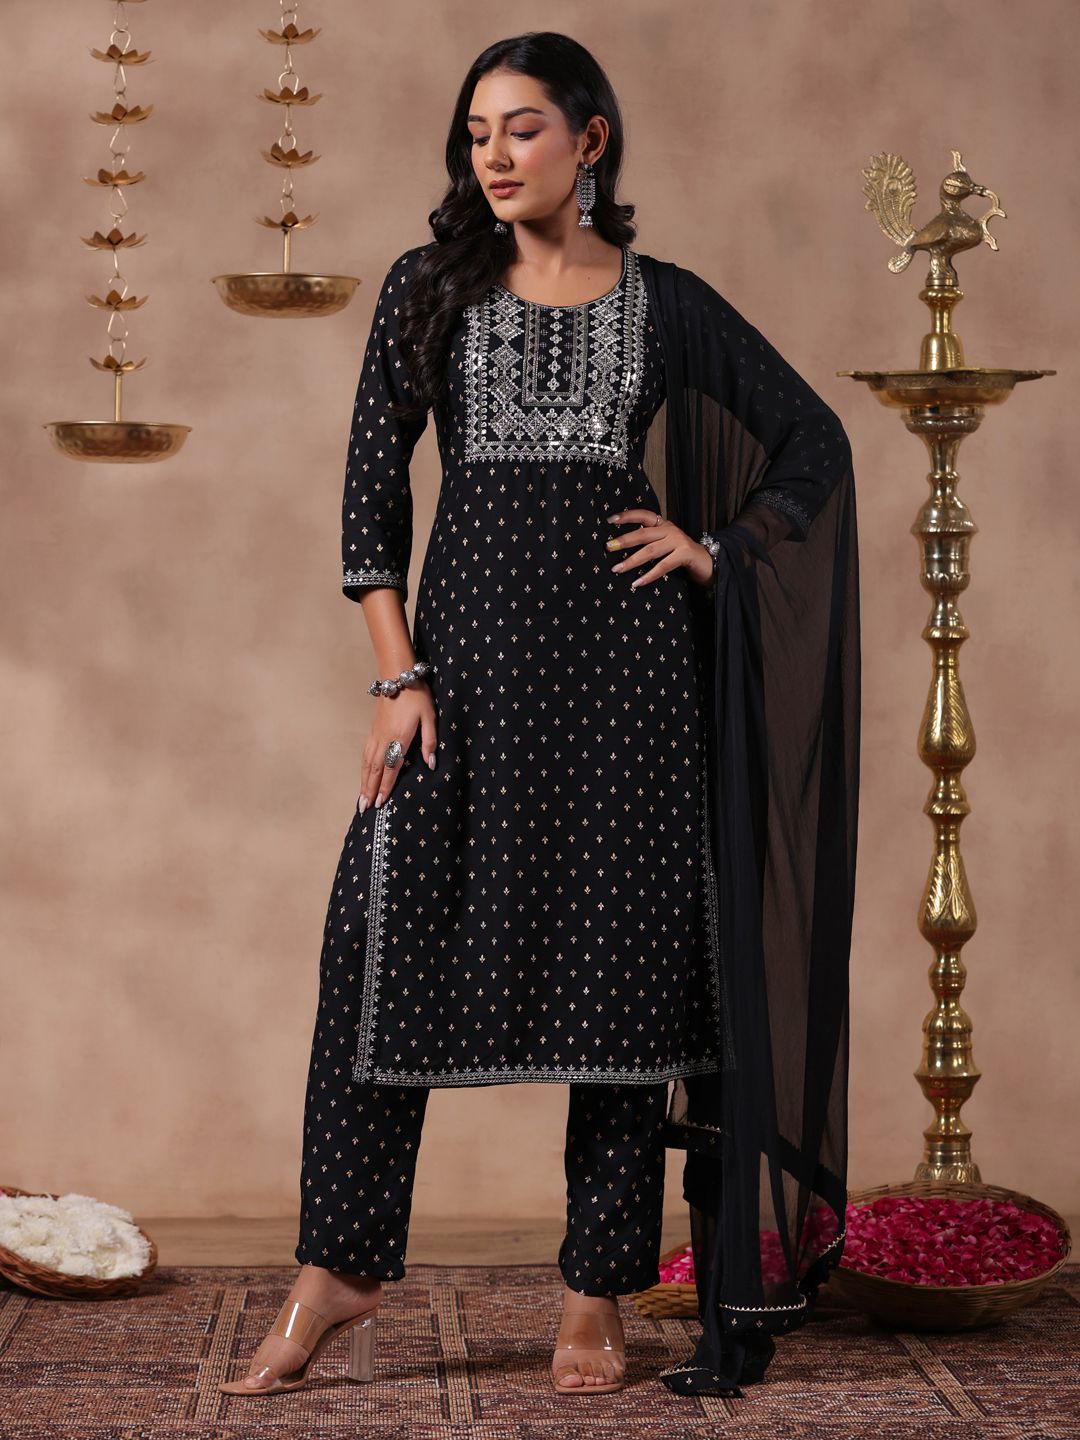     			Anubhutee Rayon Embroidered Kurti With Pants Women's Stitched Salwar Suit - Black ( Pack of 1 )